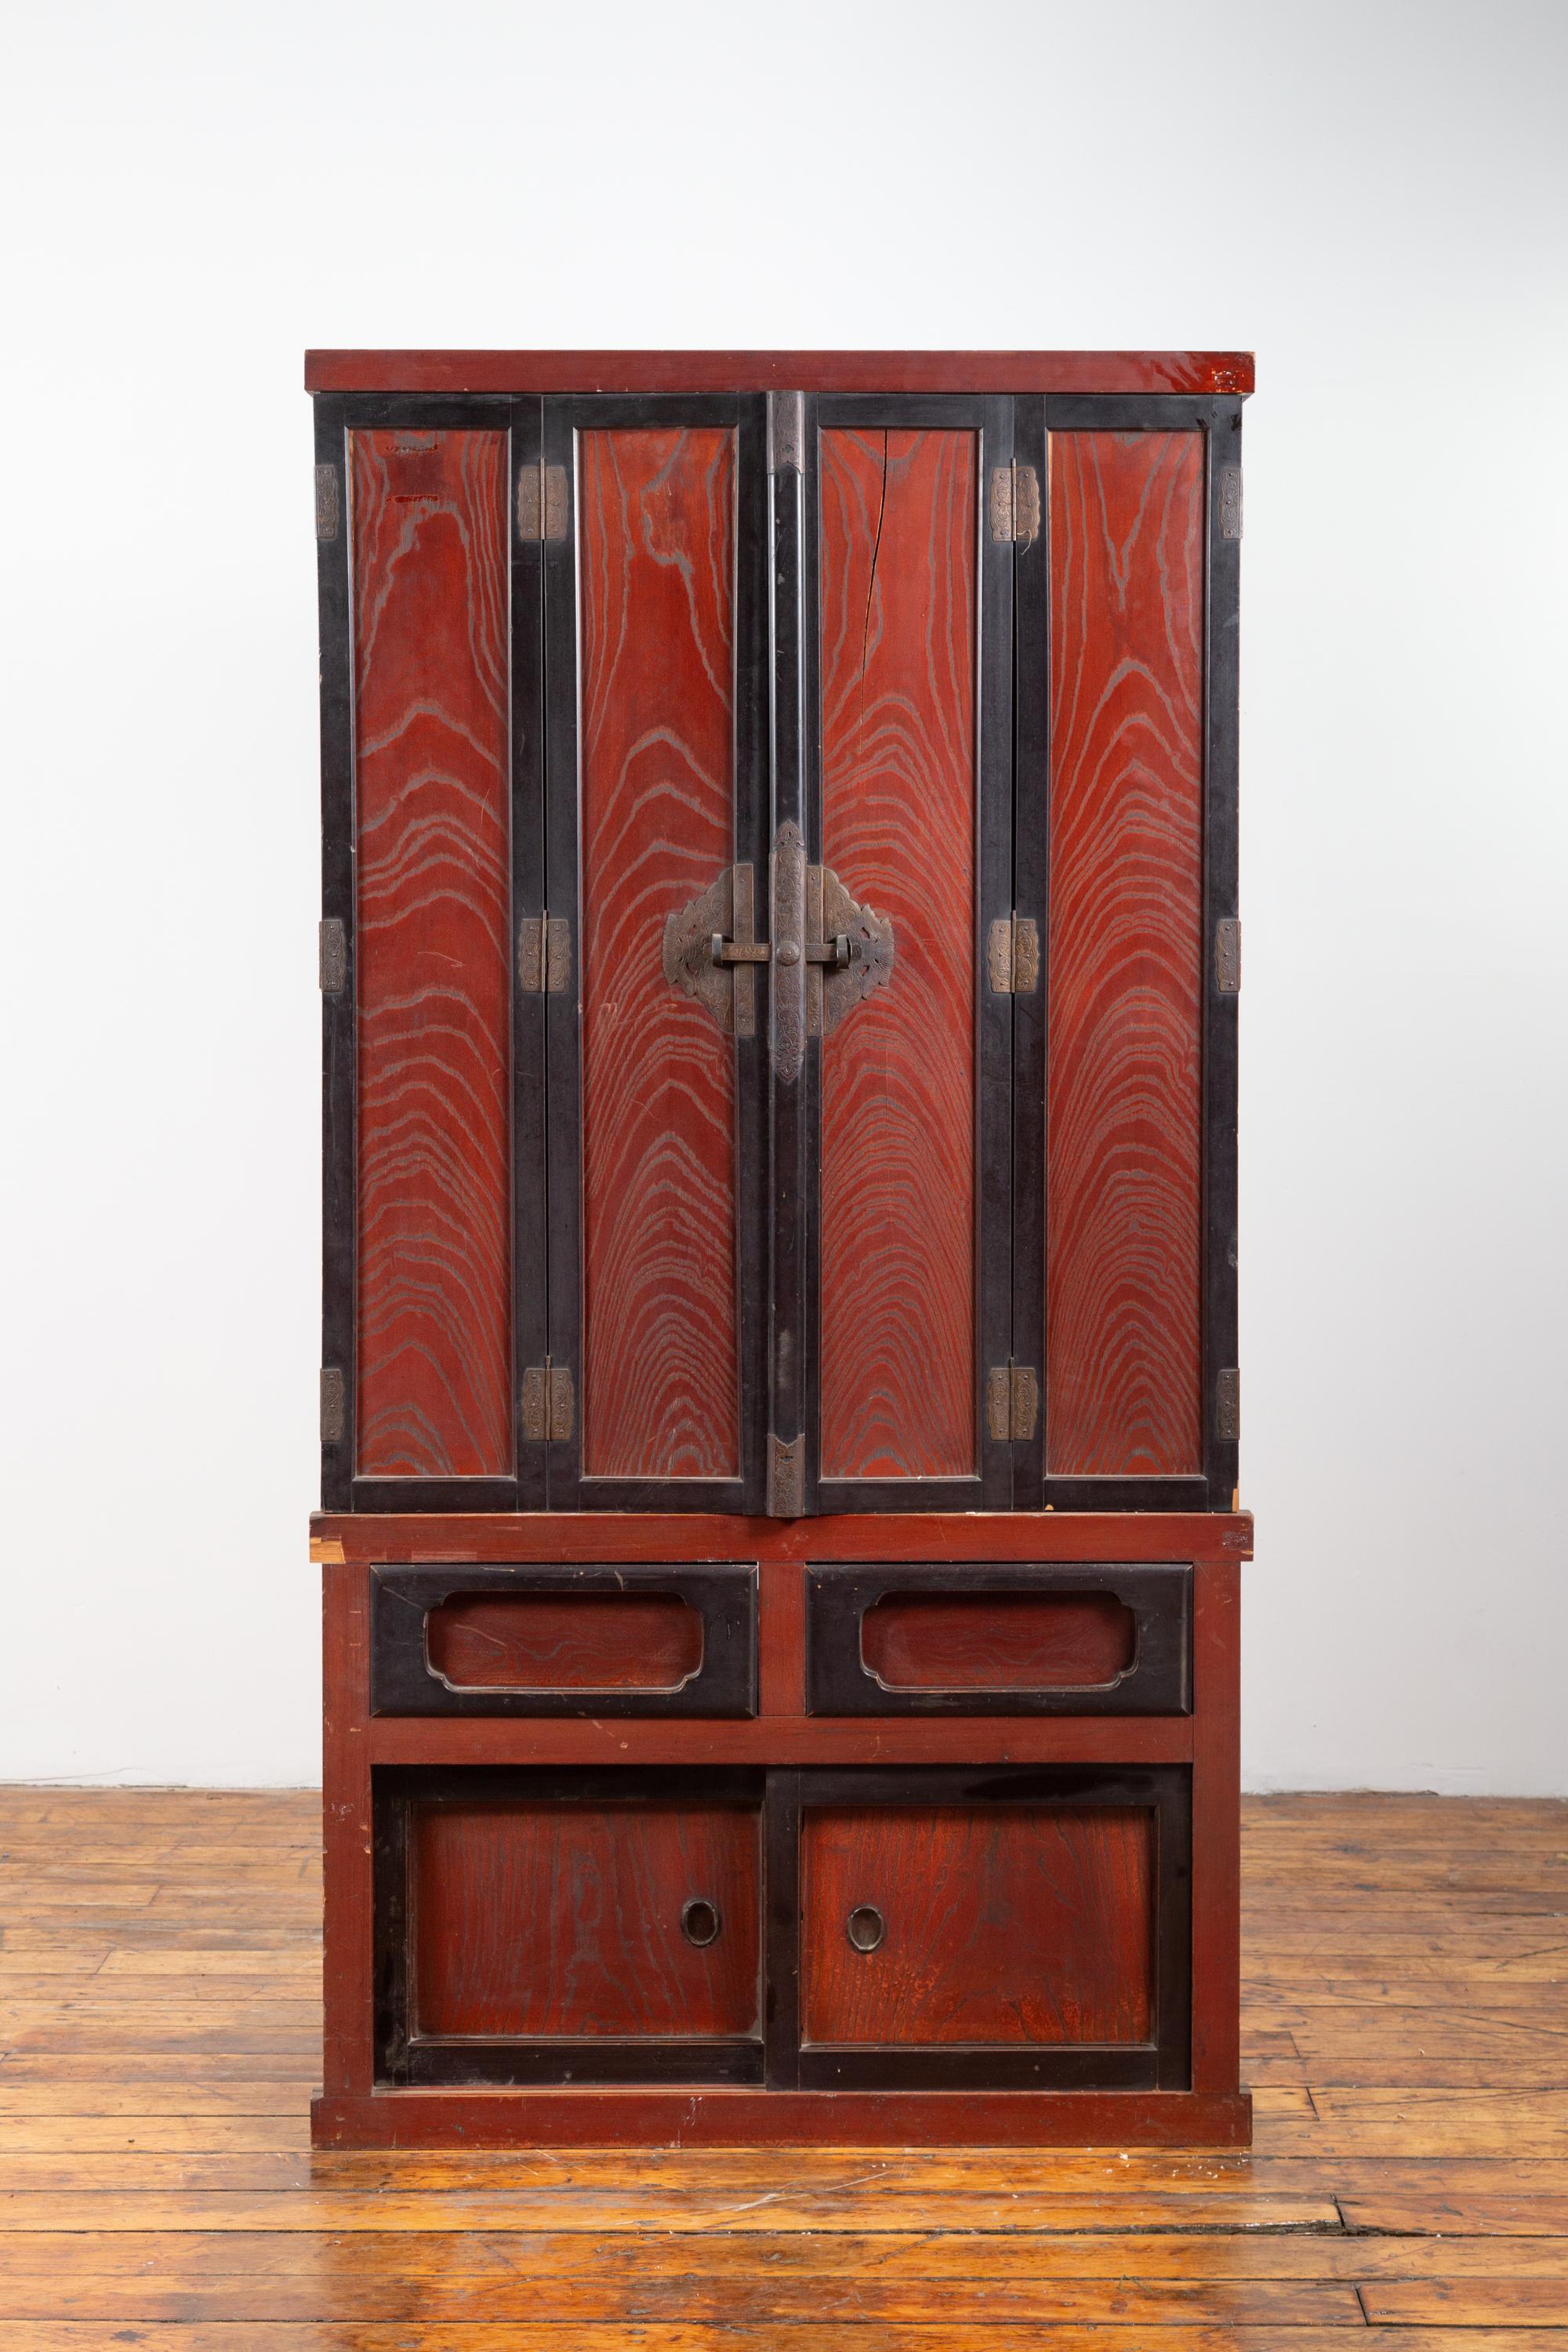 A Japanese Meiji period altar shrine cabinet from the late 19th century, with red and black patina. Born in Japan during the later years of the 19th century, this exquisite wooden cabinet is made of two parts. The upper section presents two folding